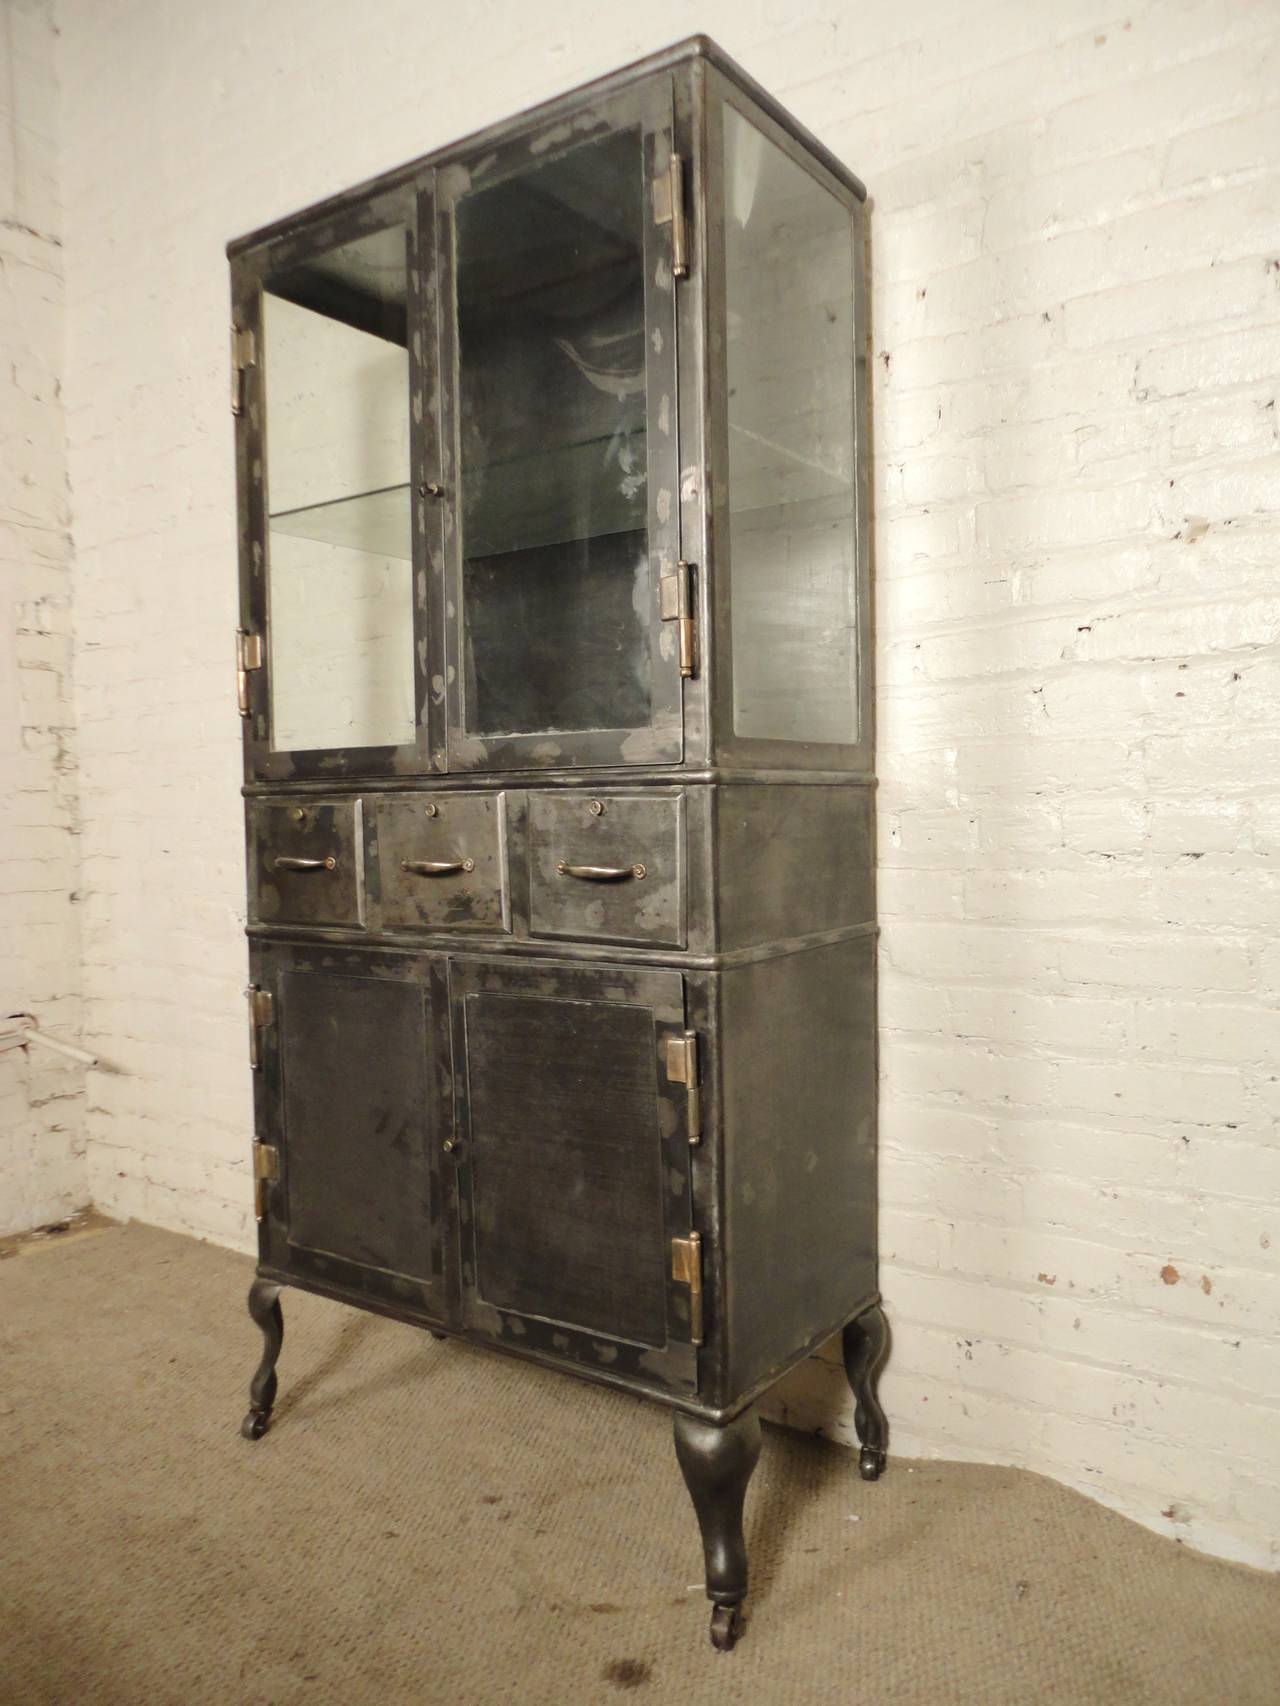 Tall hospital operating room cabinet refinished in a handsome bare metal style finish. Three glass side display top with glass shelf, three drawer and wide cabinet base. Set upon rolling casters for easy mobility, vintage lock units on all drawers